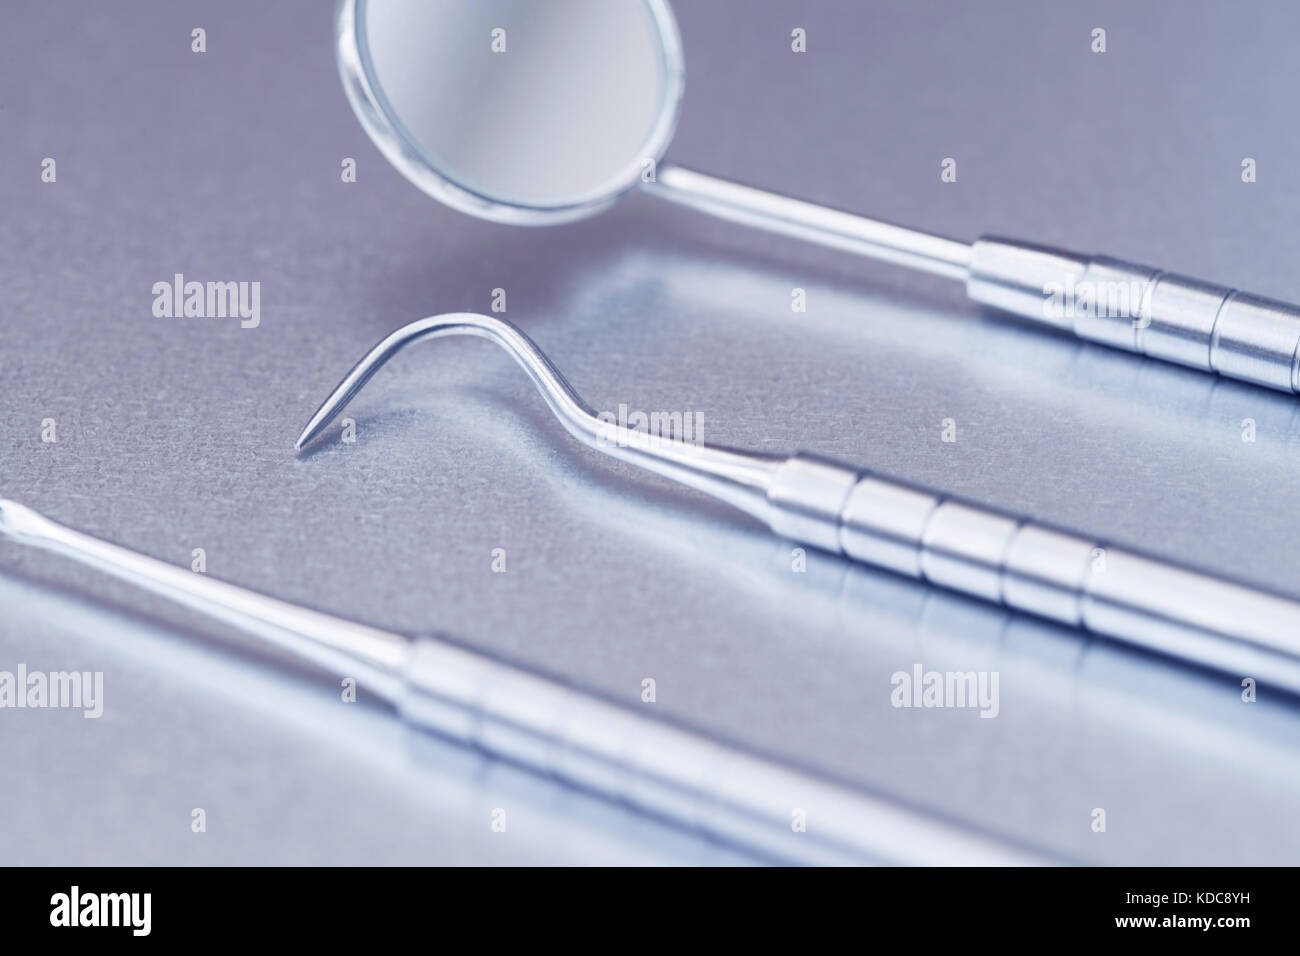 Close Up Of Dental Instruments On Metal Surface Stock Photo